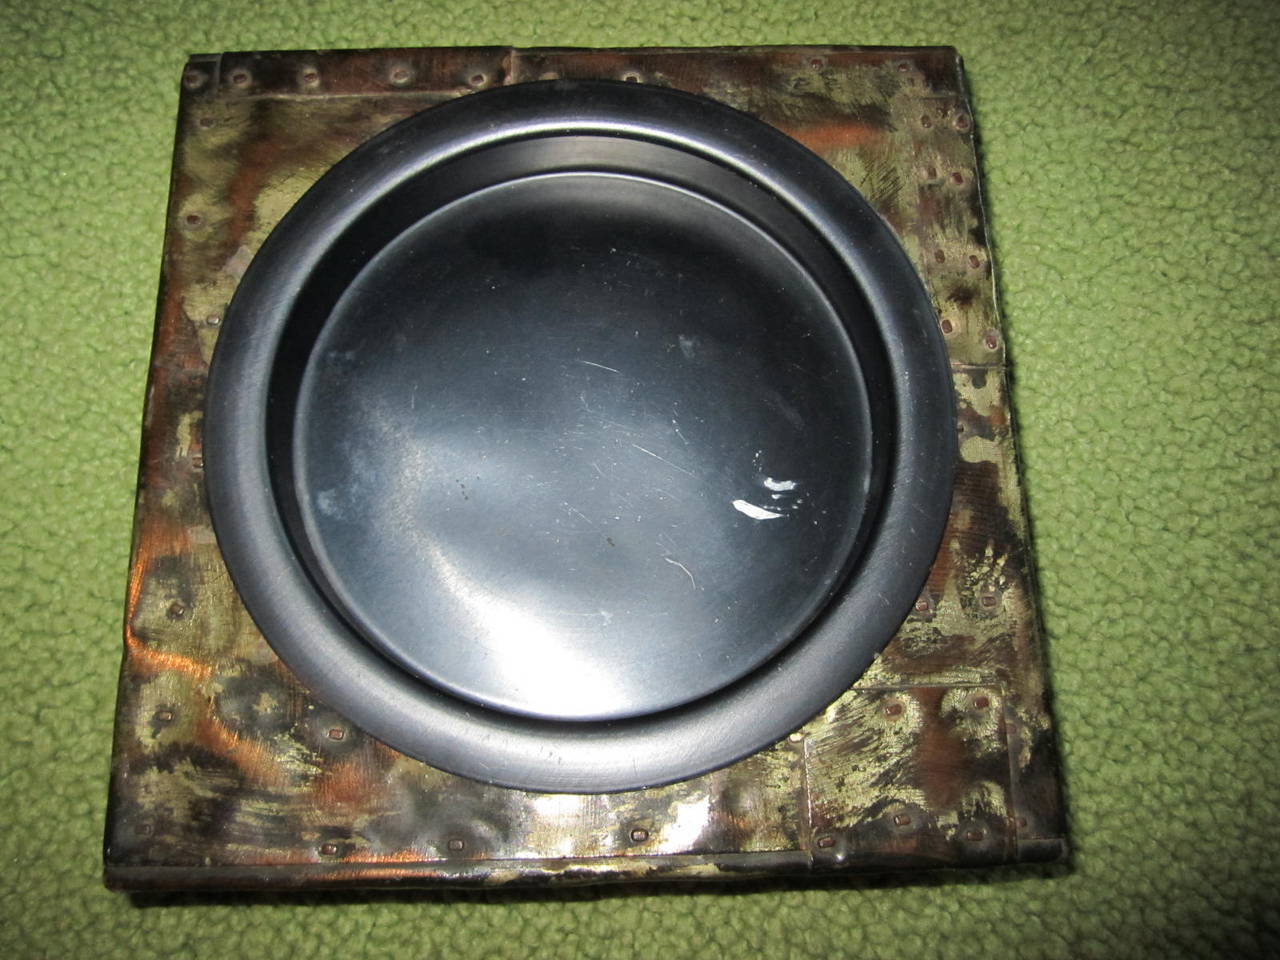 Brutalist 1960s Paul Evans patchwork metal ashtray. The black metal dish is removable for easy cleaning. Great for the Mid-Century collector who has everything!